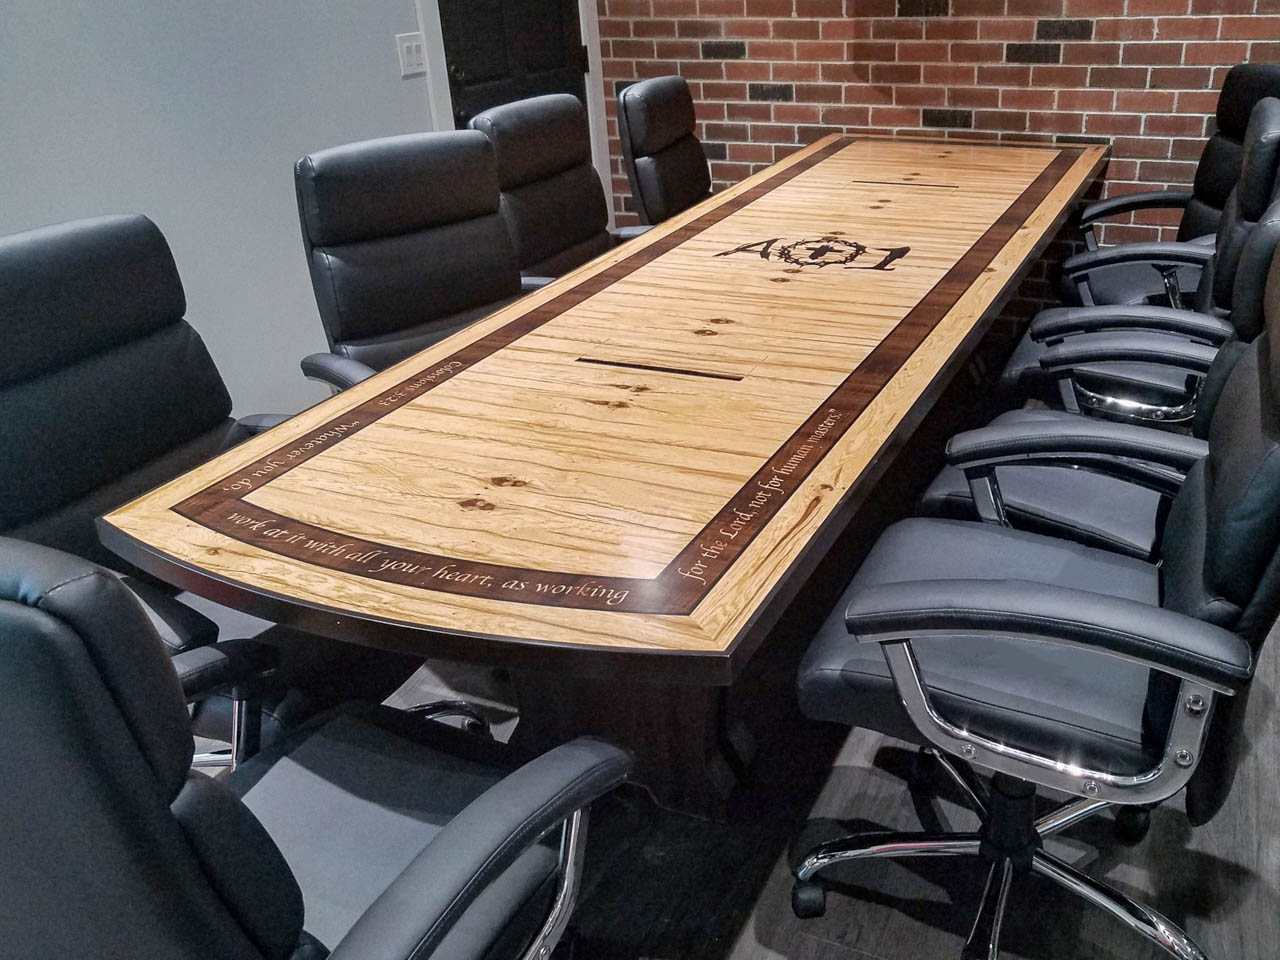 AO1 Foundation Modern Conference Table